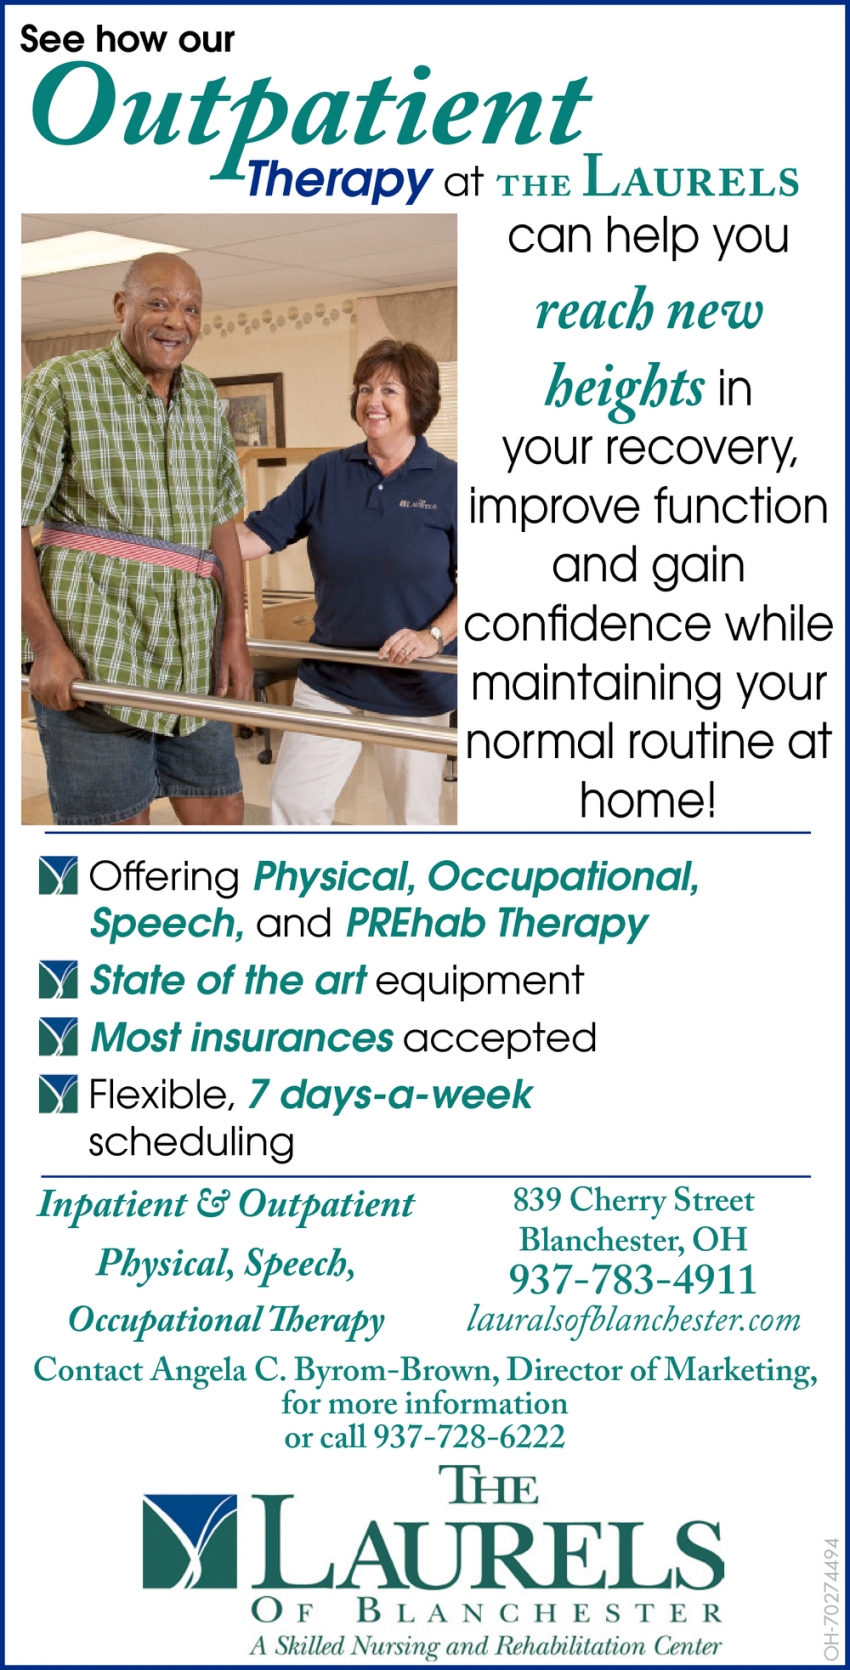 Offering Physical, Occupational, Speech, and PREhab Therapy